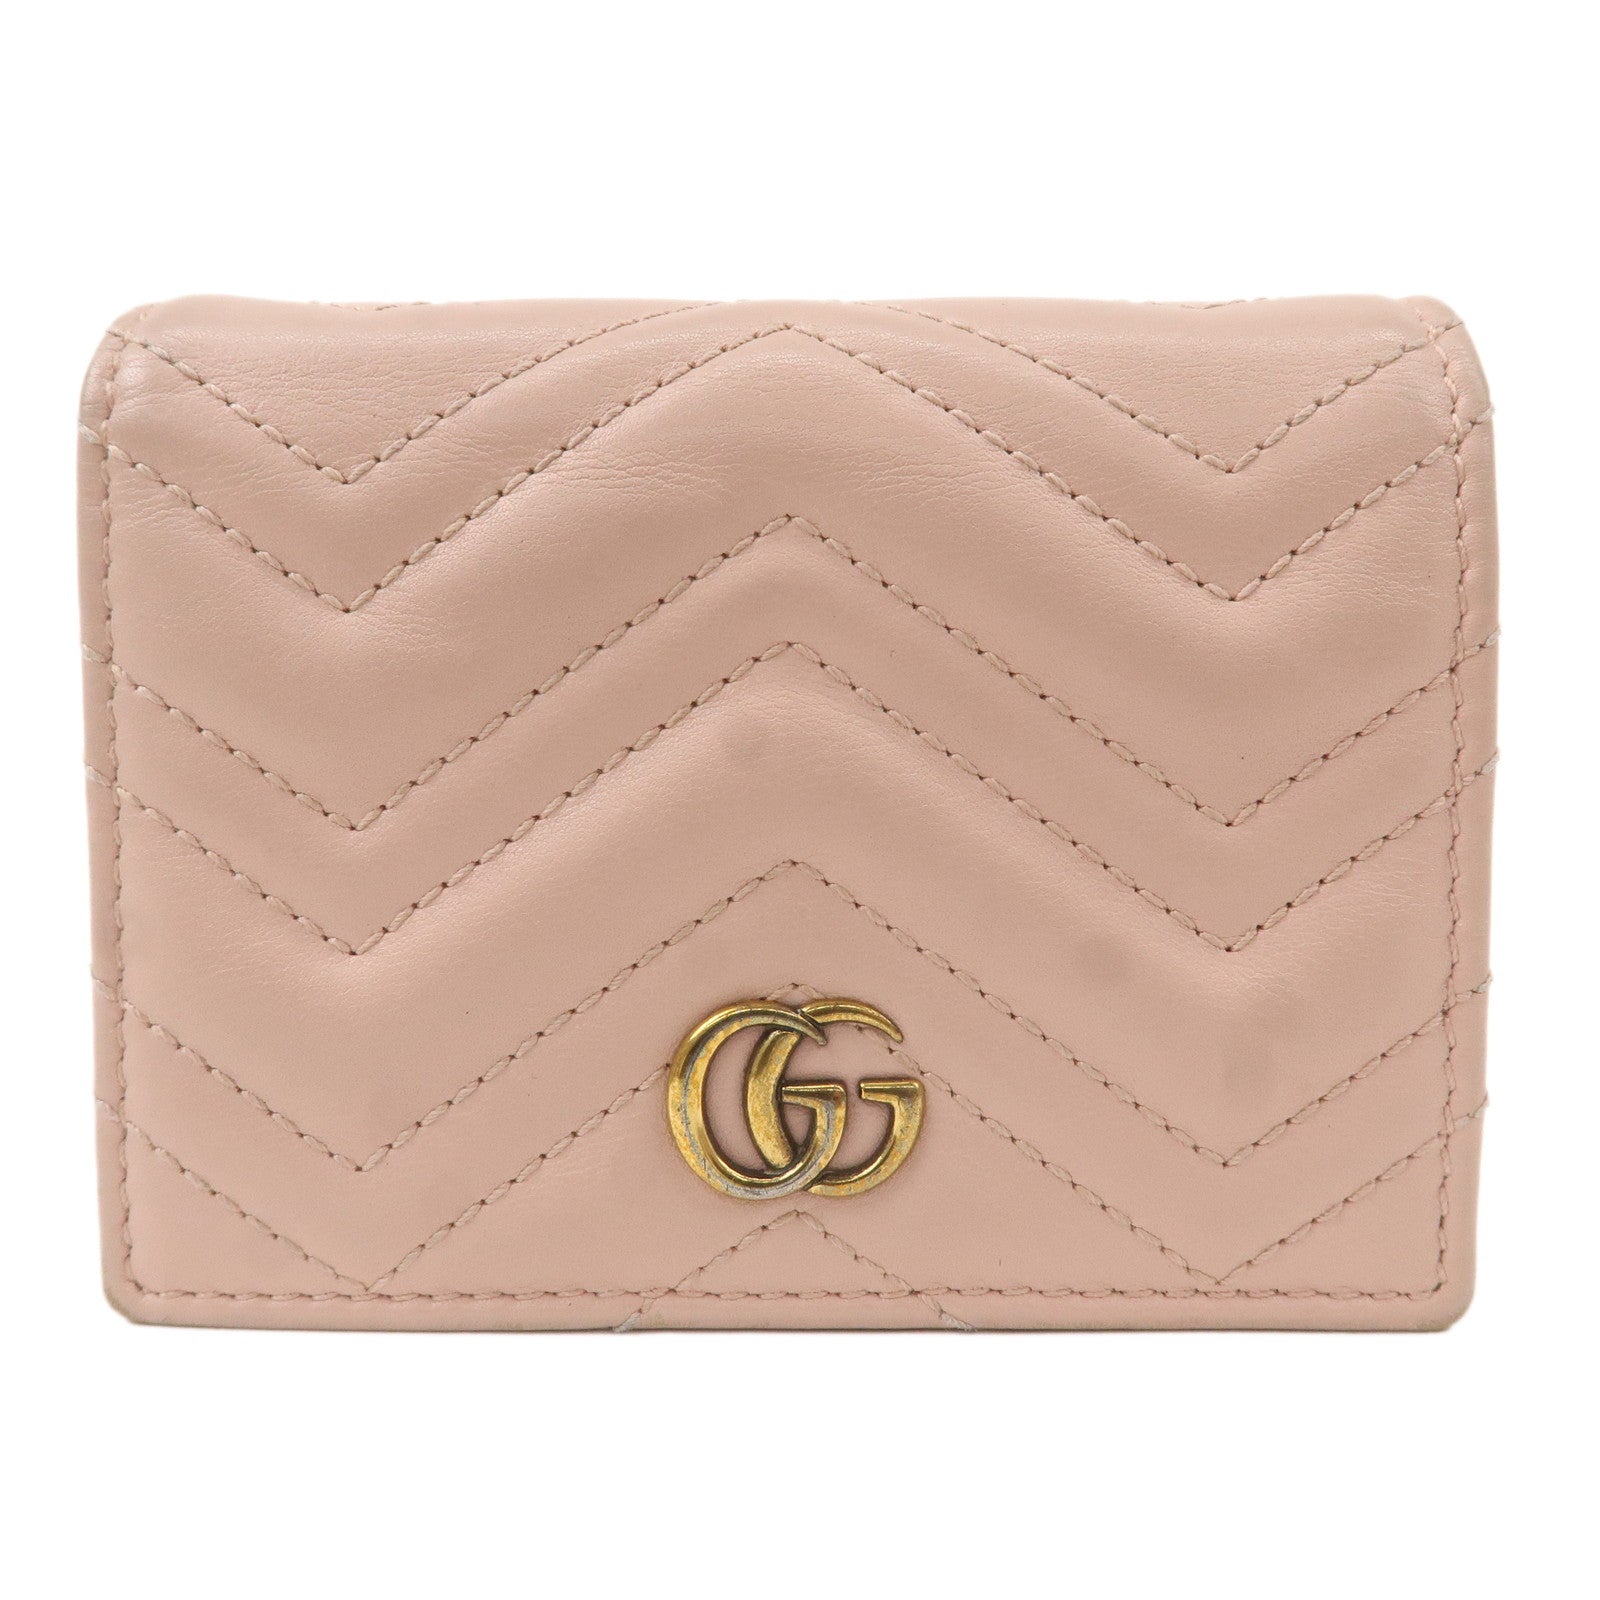 GUCCI-Marmont-Leather-Bifold-Small-Wallet-Pink-Beige-466492